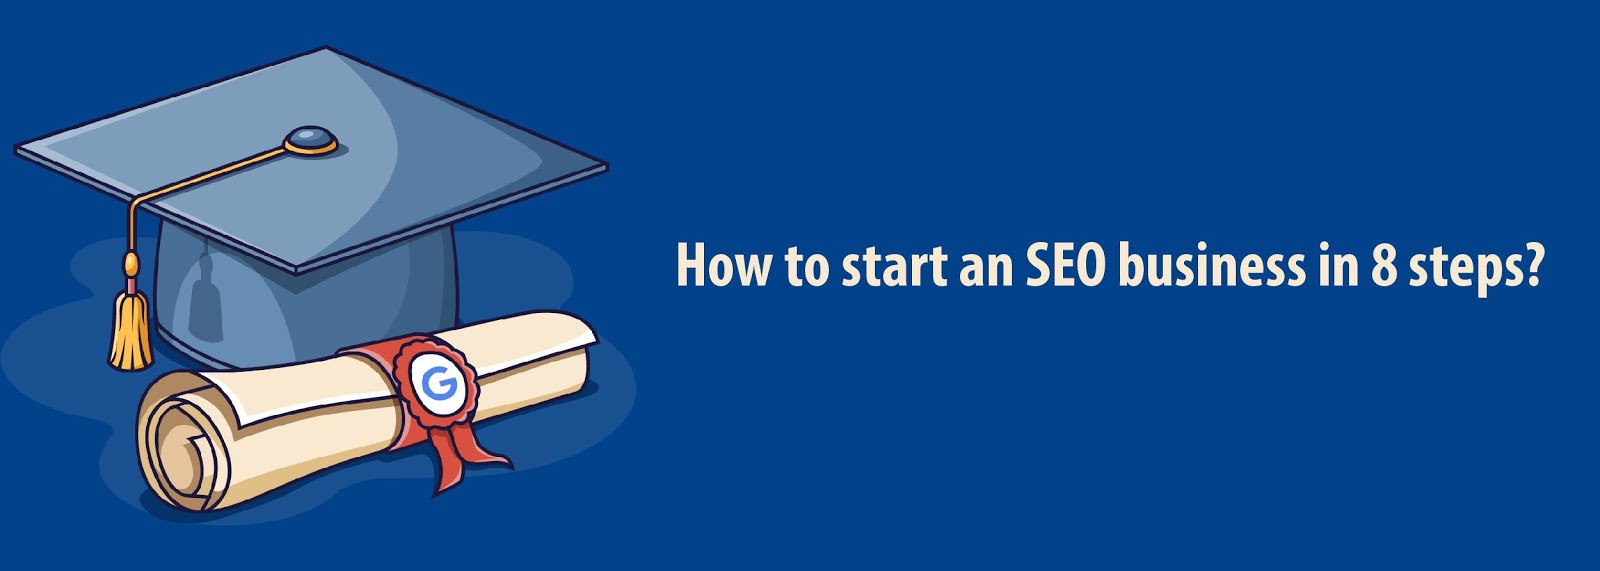 How to start SEO business in 8 steps